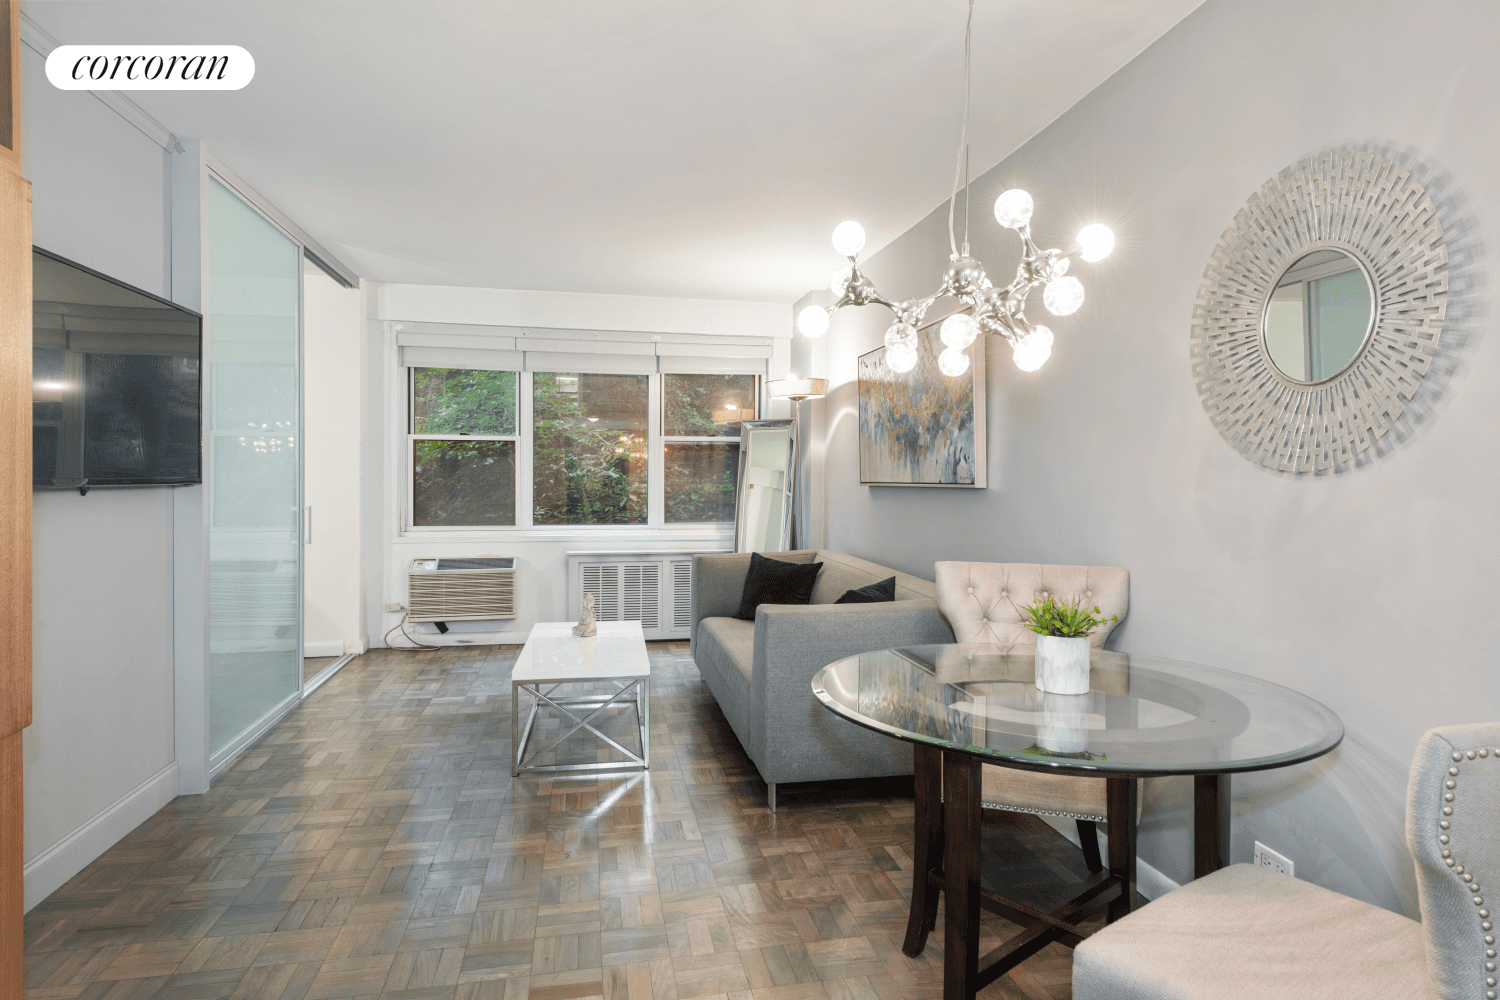 This gem is an oasis of elegance and peace nestled within one of the most exciting NYC neighborhoods and superbly managed building.